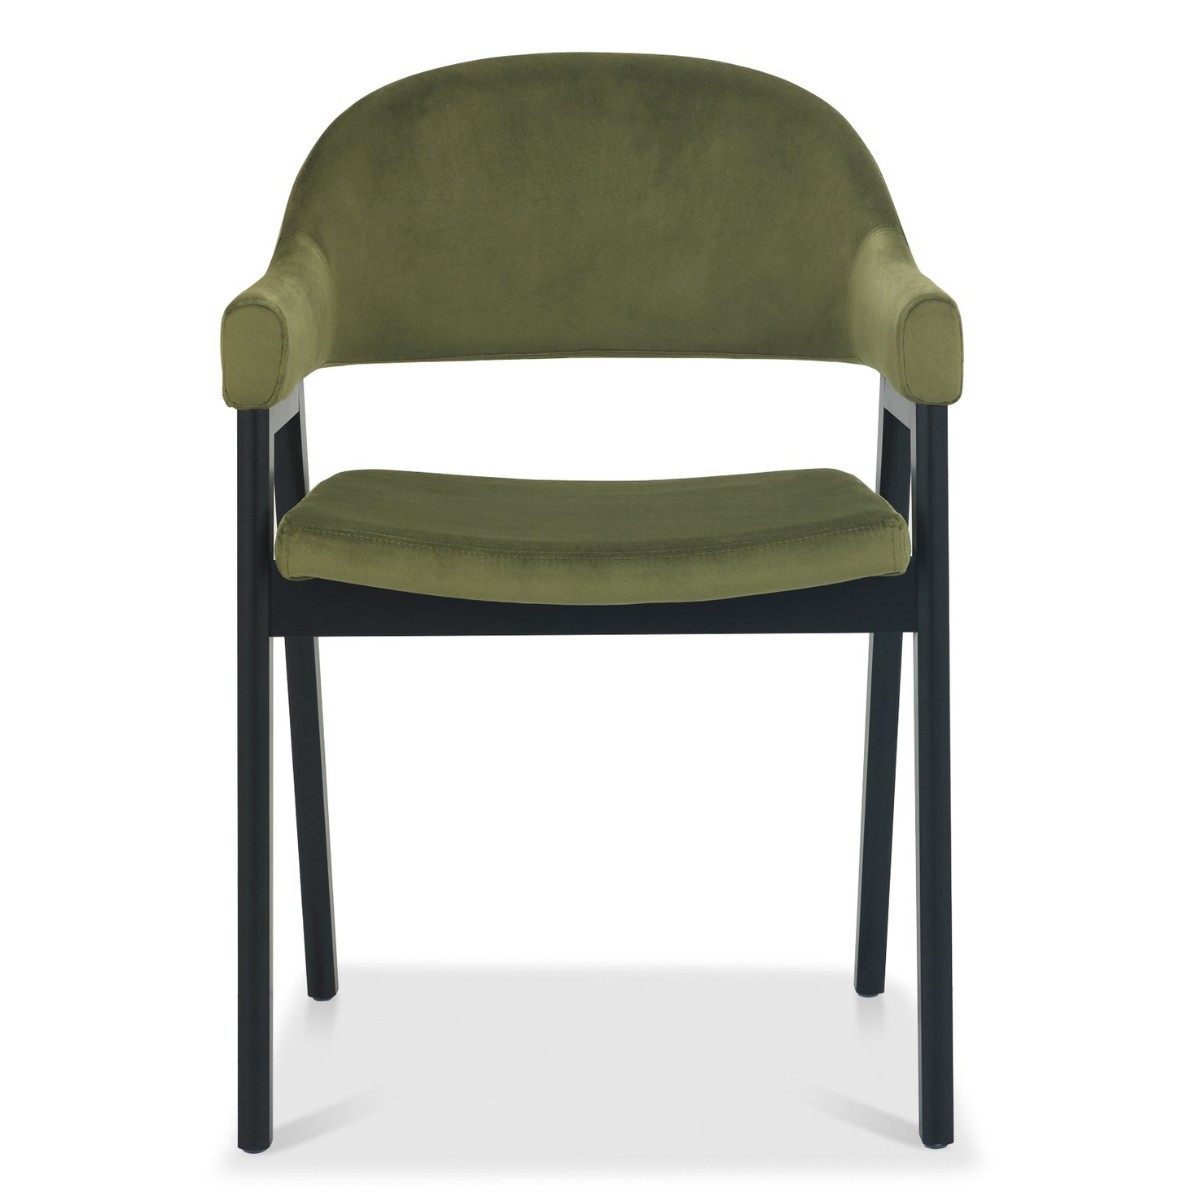 Chambery Weathered Oak Curved Back Dining Chair Green- 2